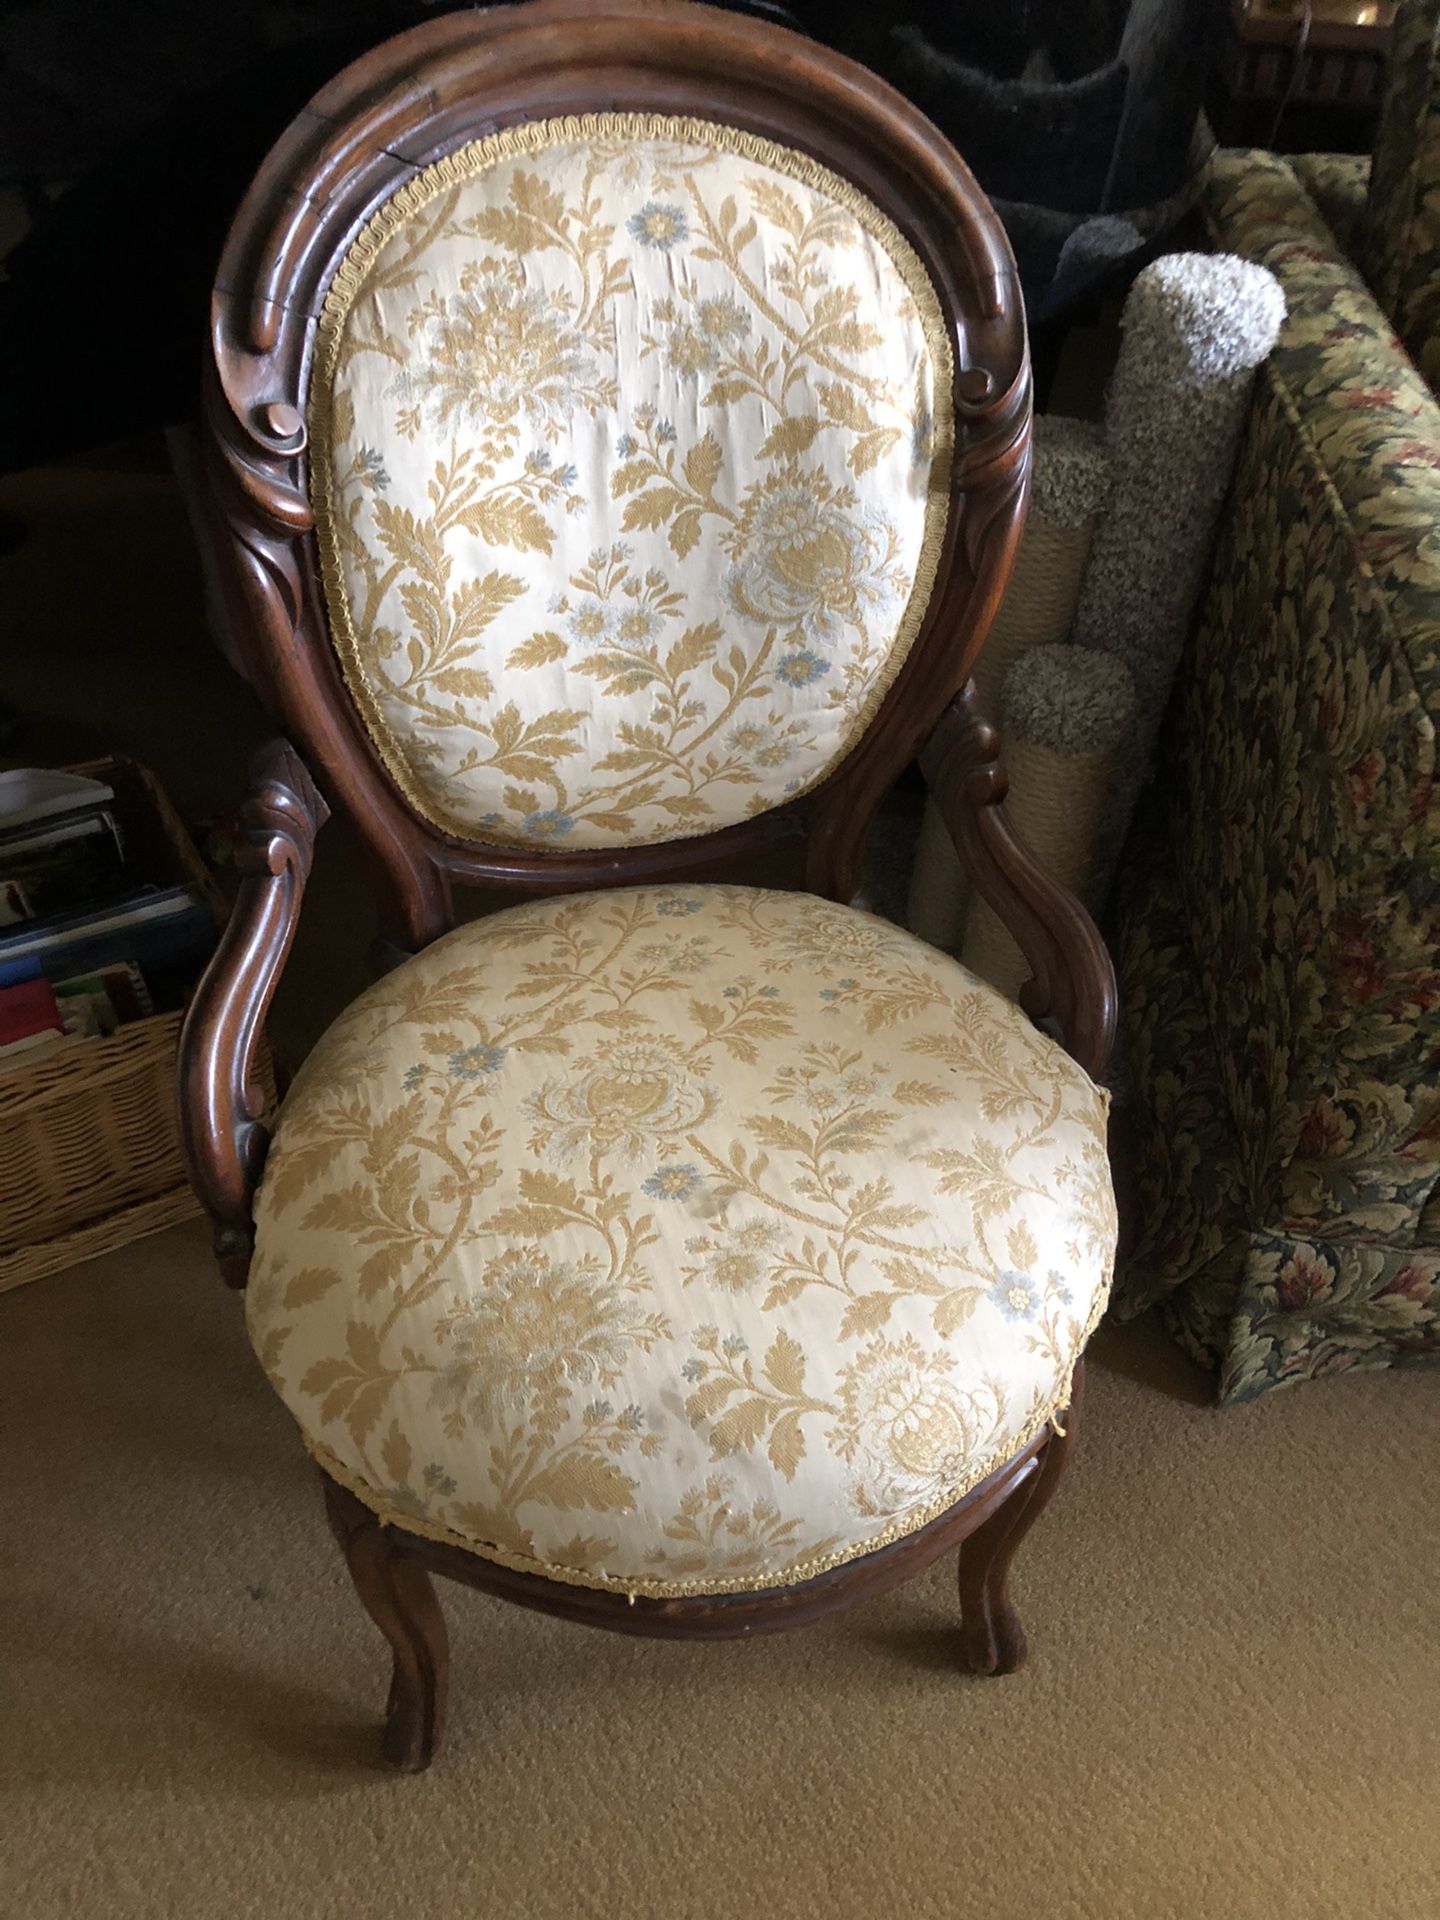 Two Antique parlor chairs